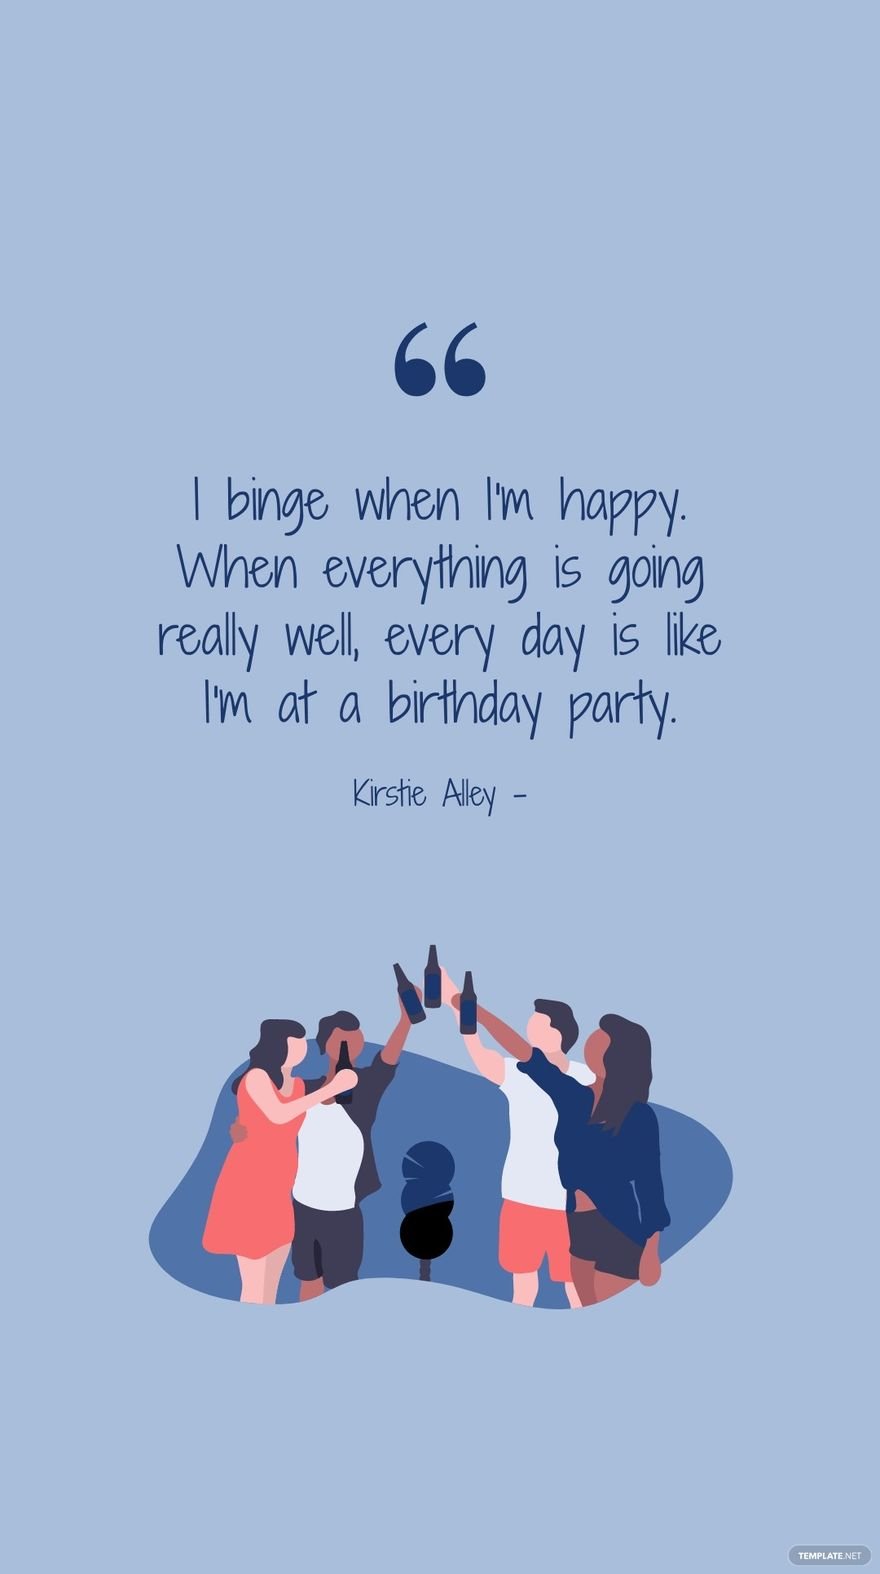 Free Kirstie Alley - I binge when I'm happy. When everything is going really well, every day is like I'm at a birthday party.